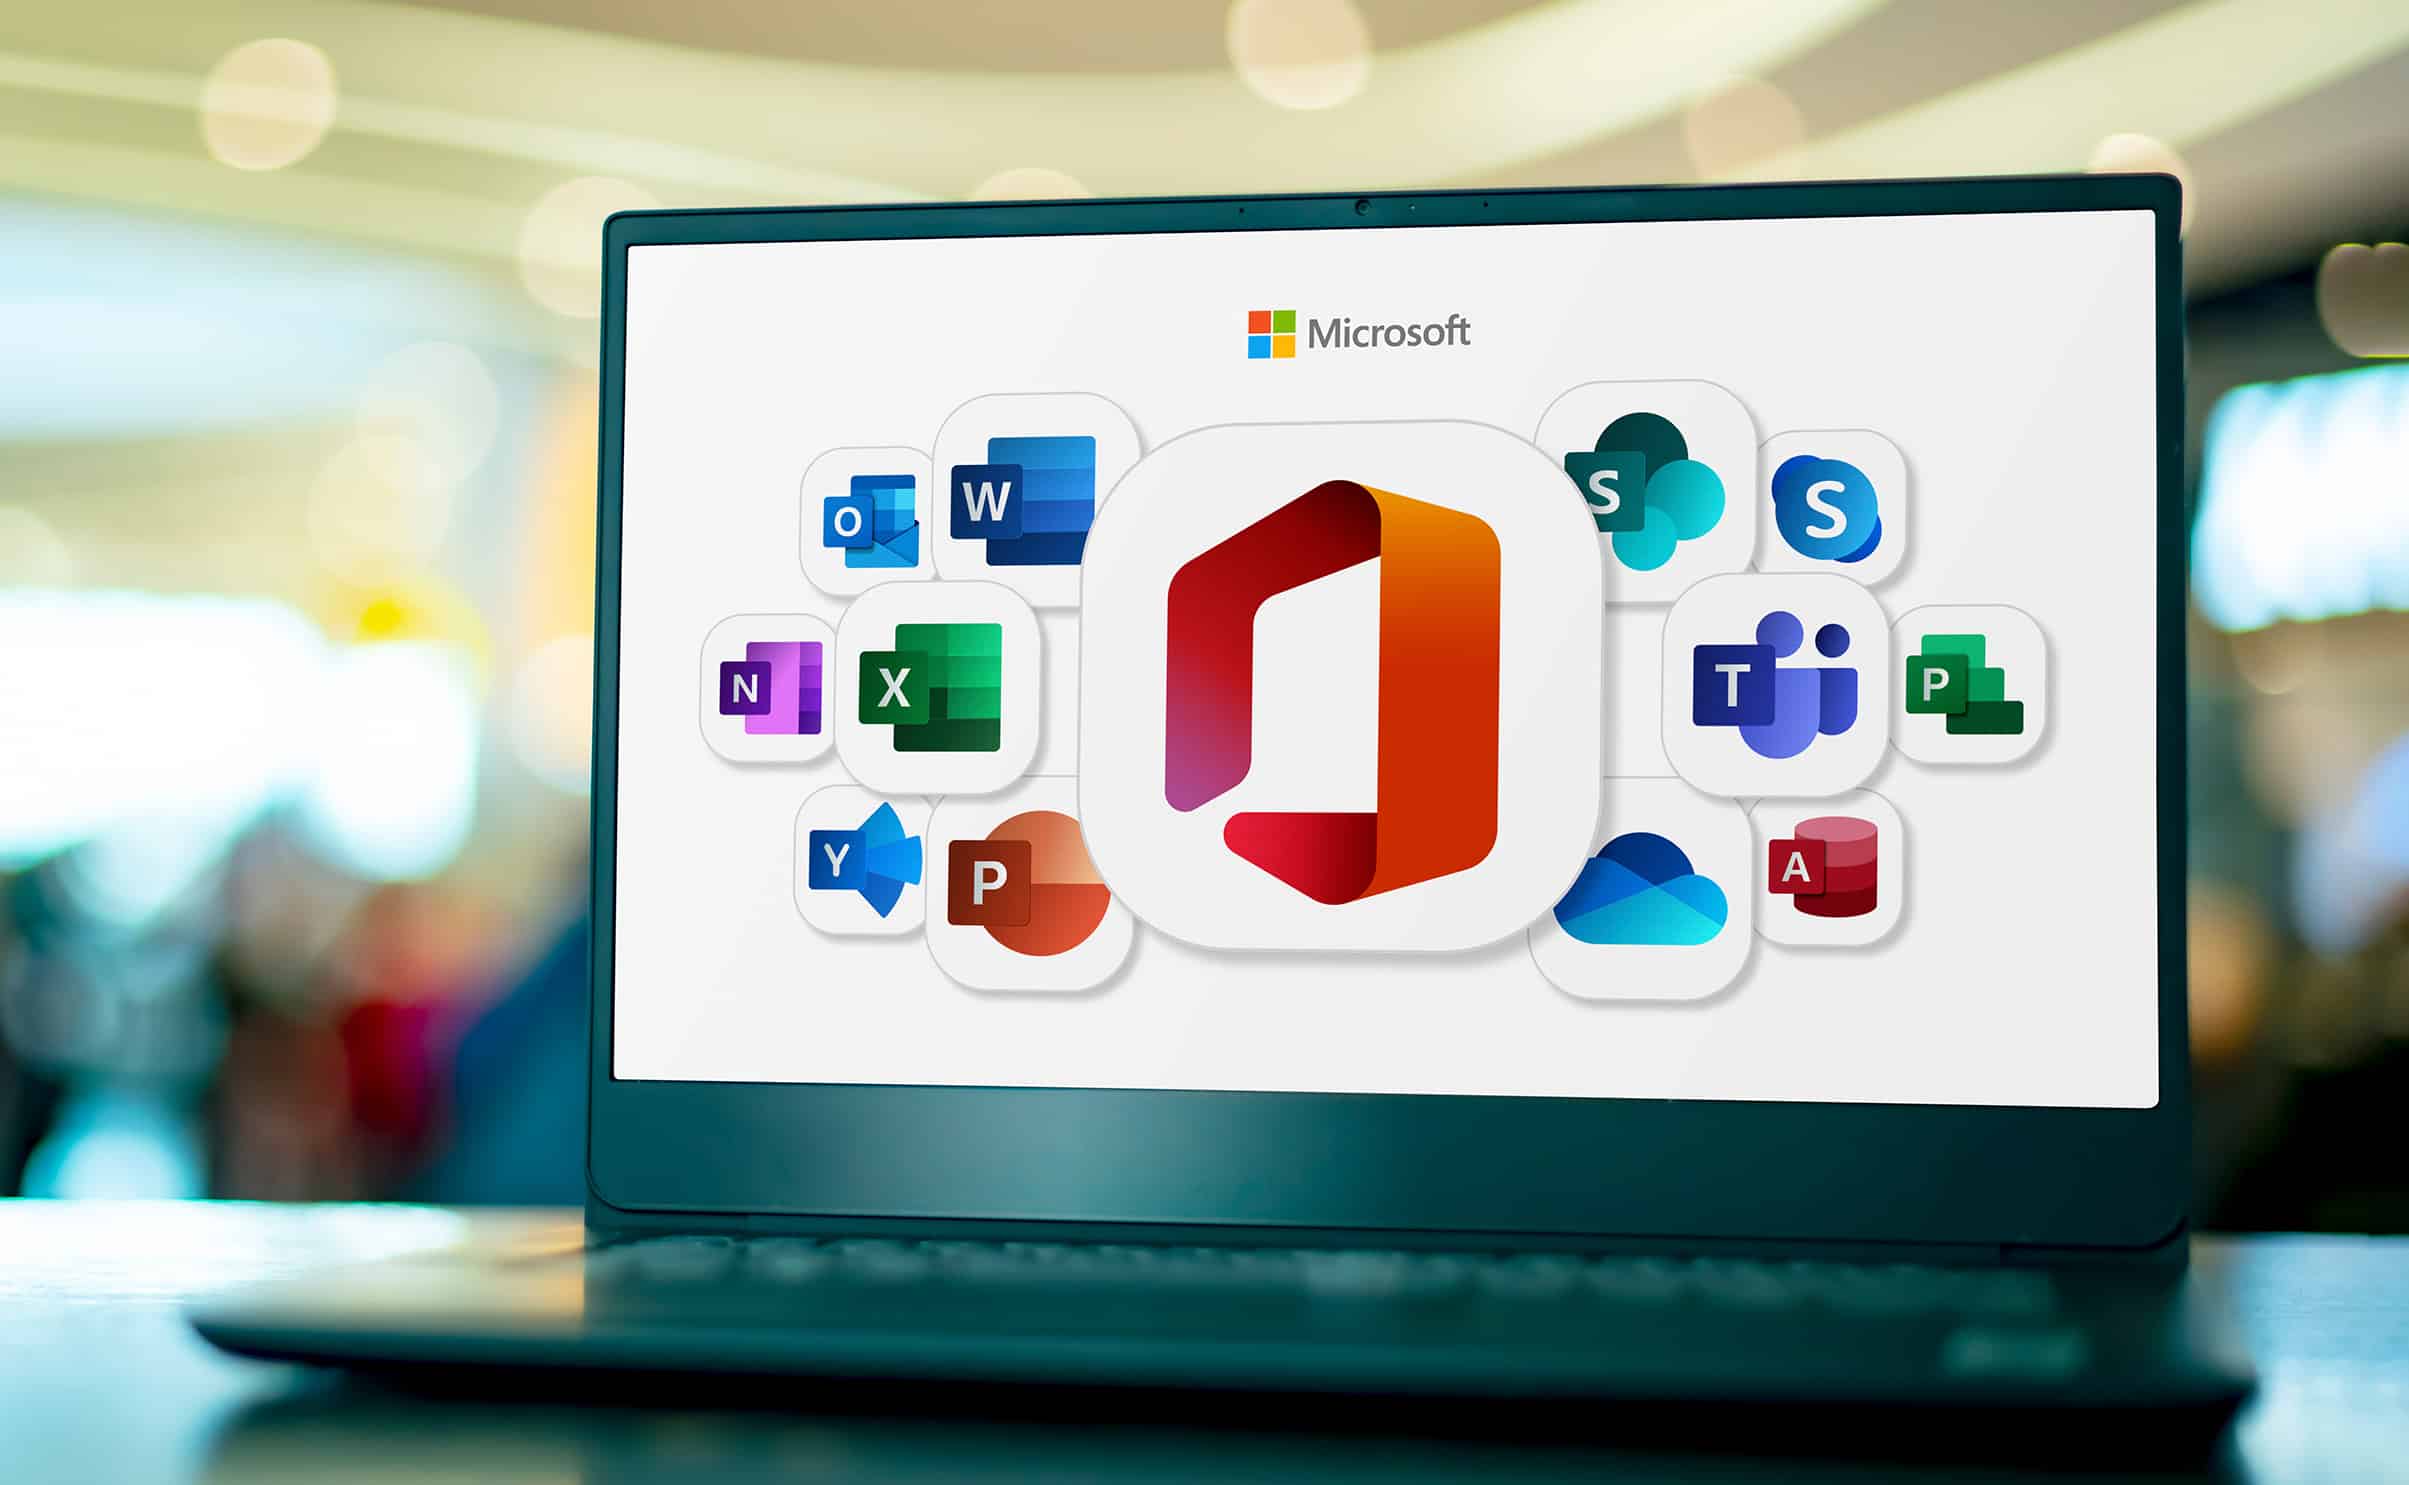 POZNAN, POL - SEP 28, 2022: Laptop computer displaying logos of Microsoft Office, a family of client software, server software, and services developed by Microsoft